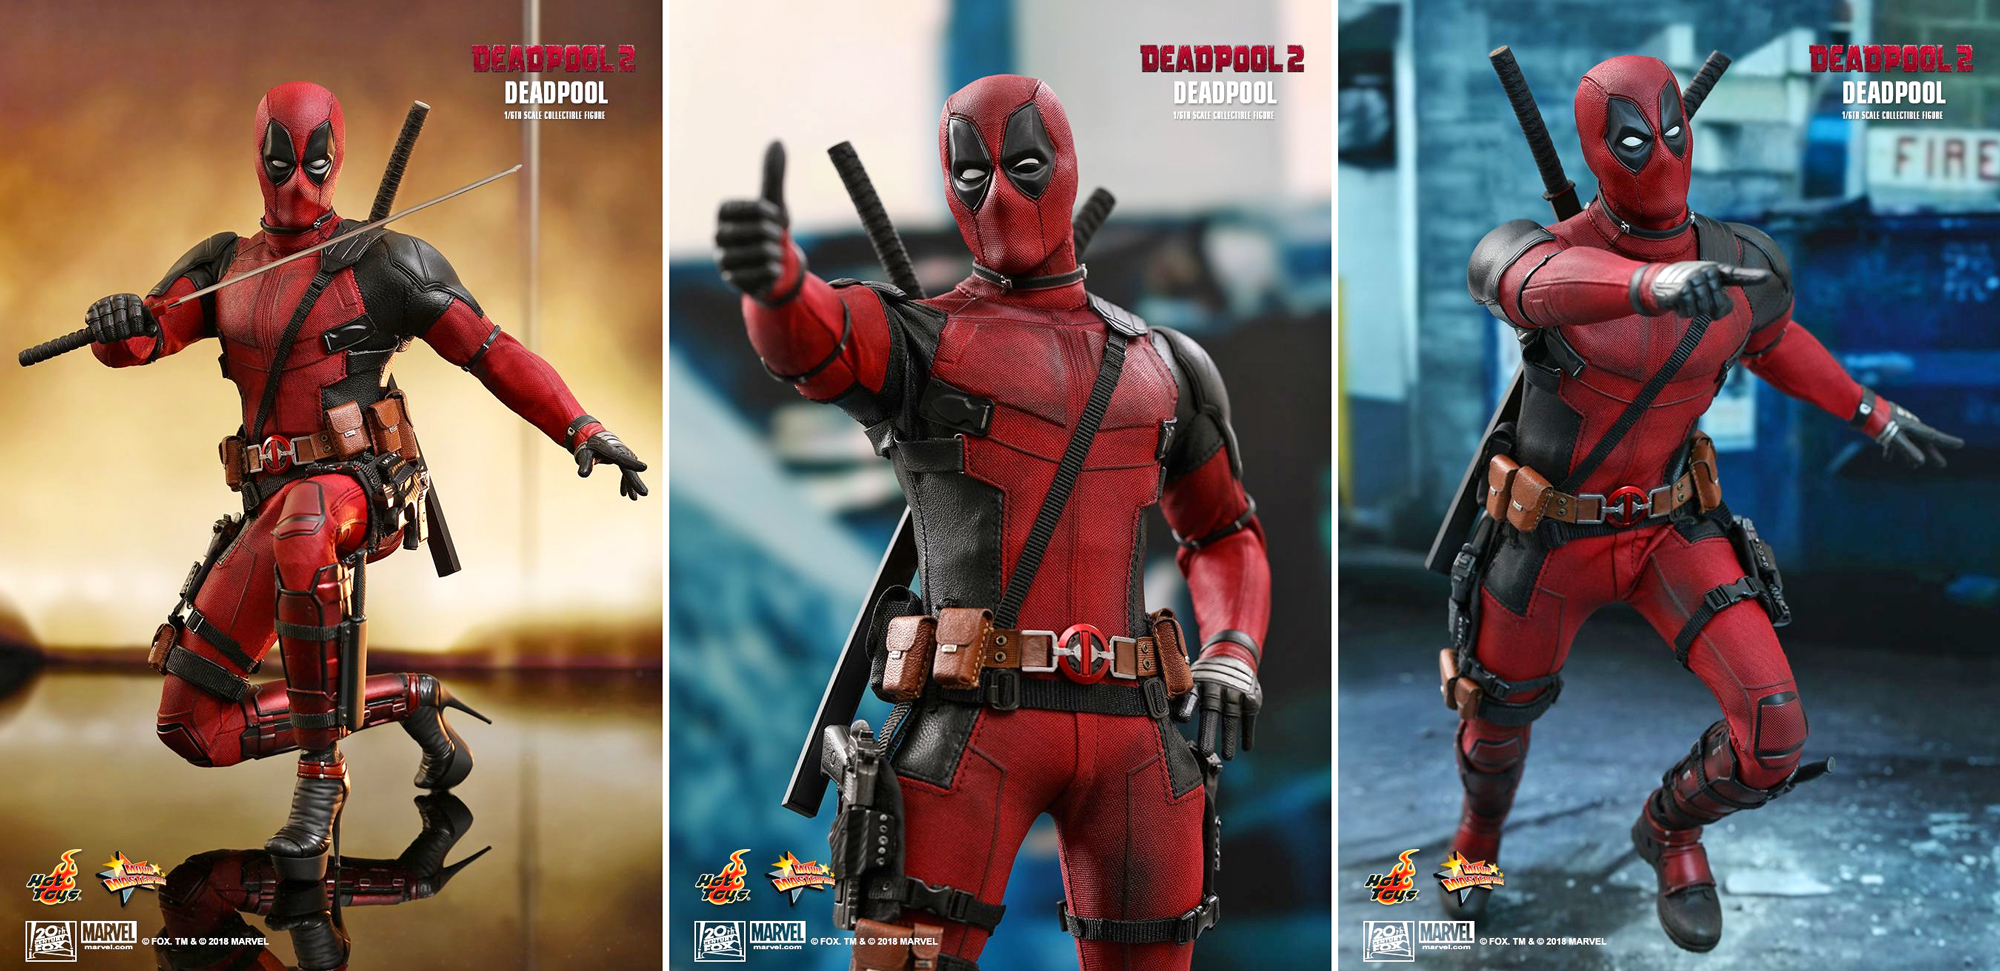 A Deadpool Figure Fit For The Dance Floor, And More Of The Greatest Toys Of The Week